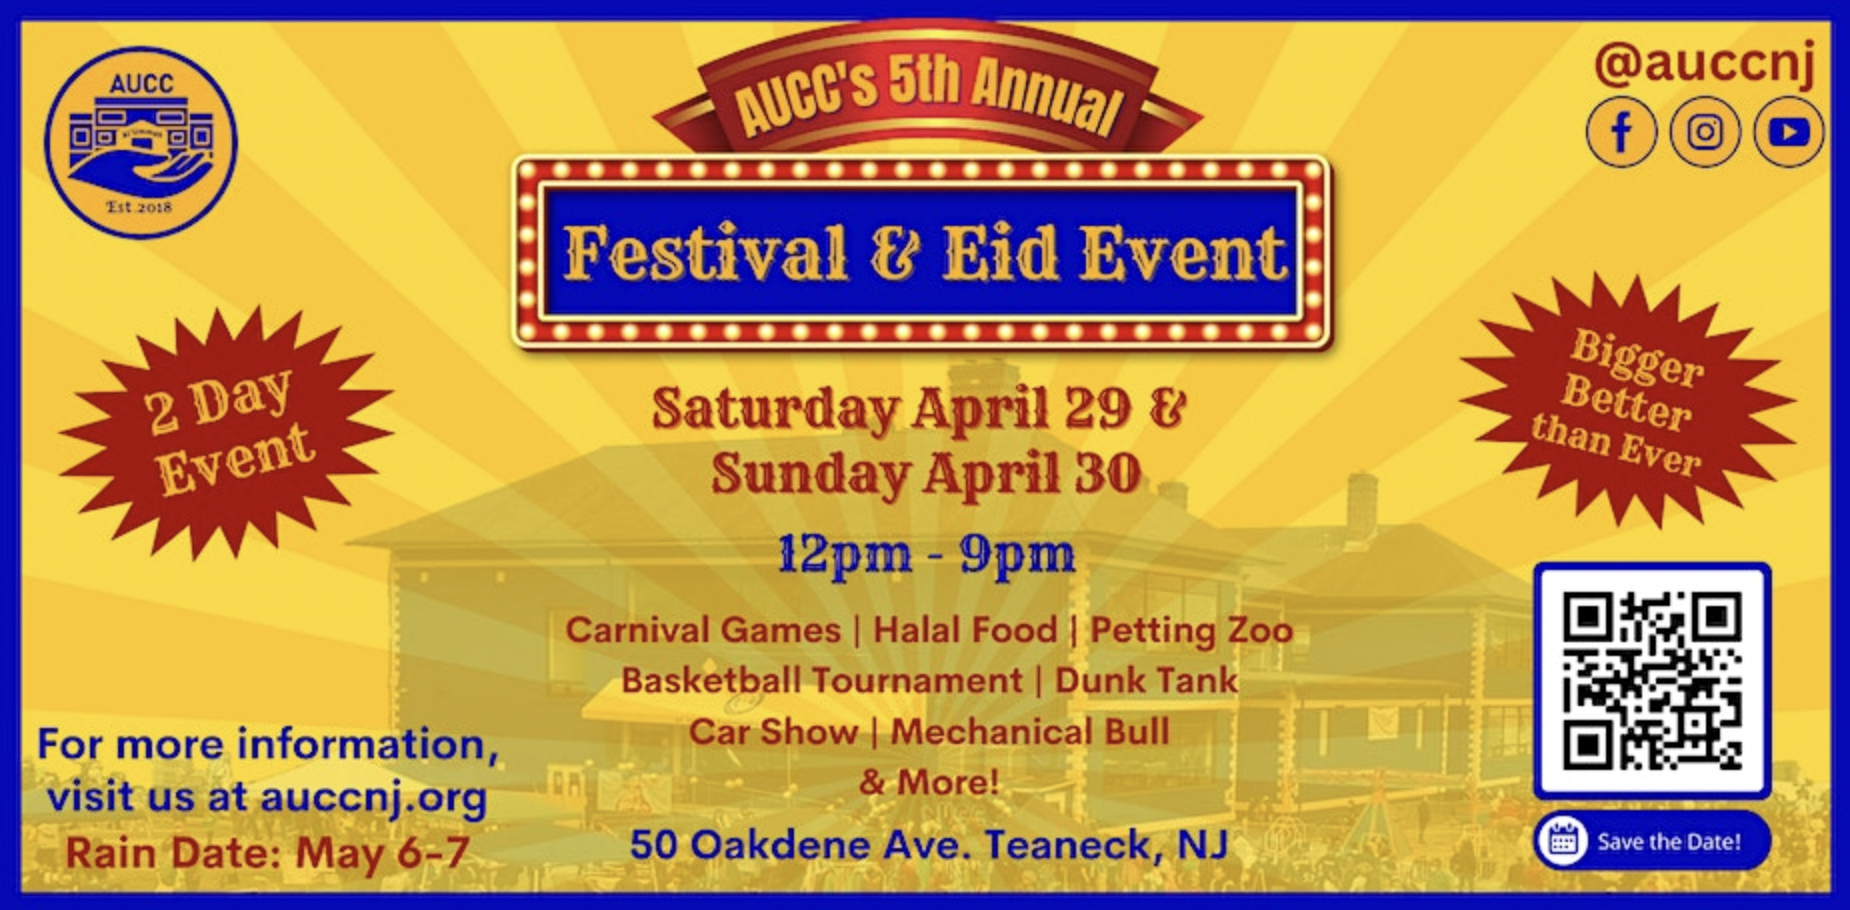 AUCC 5th Annual Festival and Eid Event